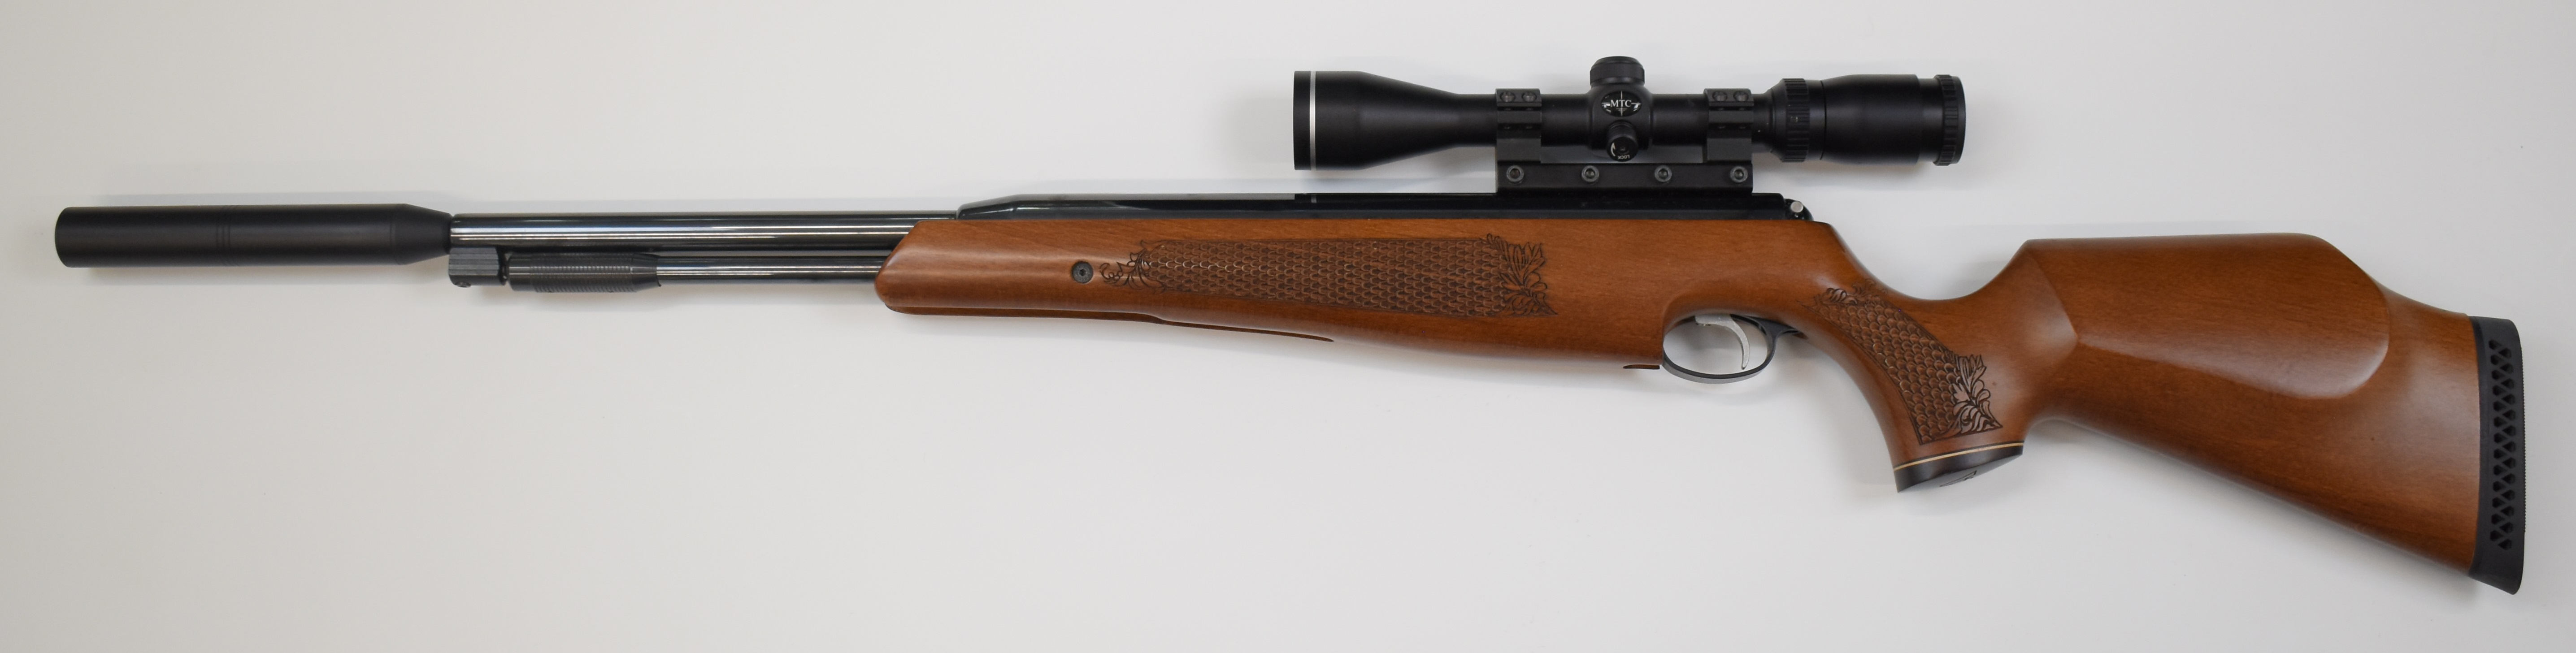 Air Arms TX200 .22 under-lever air rifle with carved semi-pistol grip and forend, adjustable - Image 7 of 11